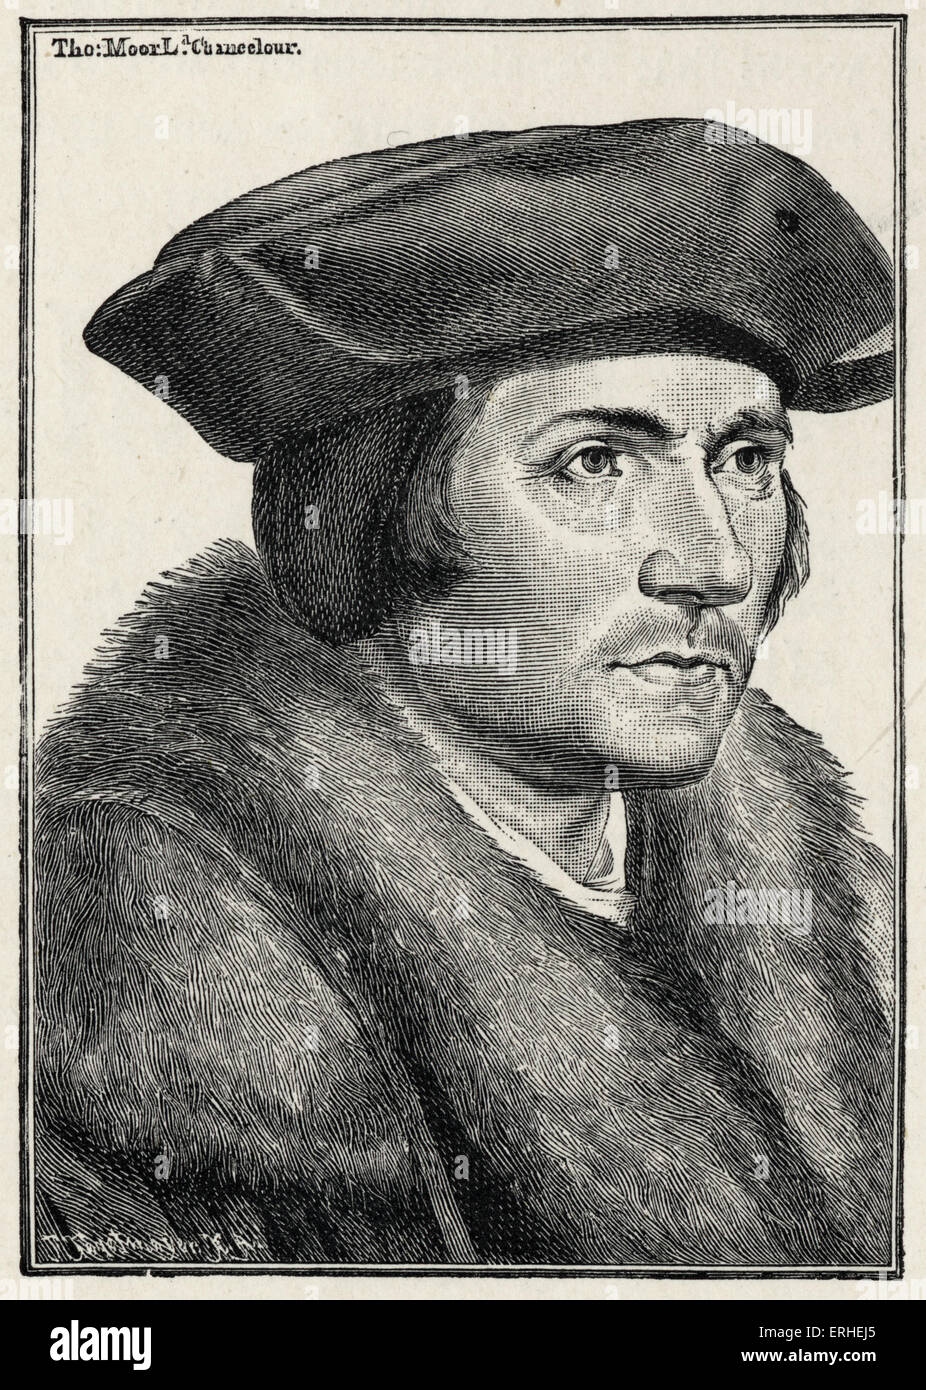 Sir Thomas More - portrait - politician - author c 1478-1535 - from Bartolossi engraving - after Holbein drawing - Lord Stock Photo